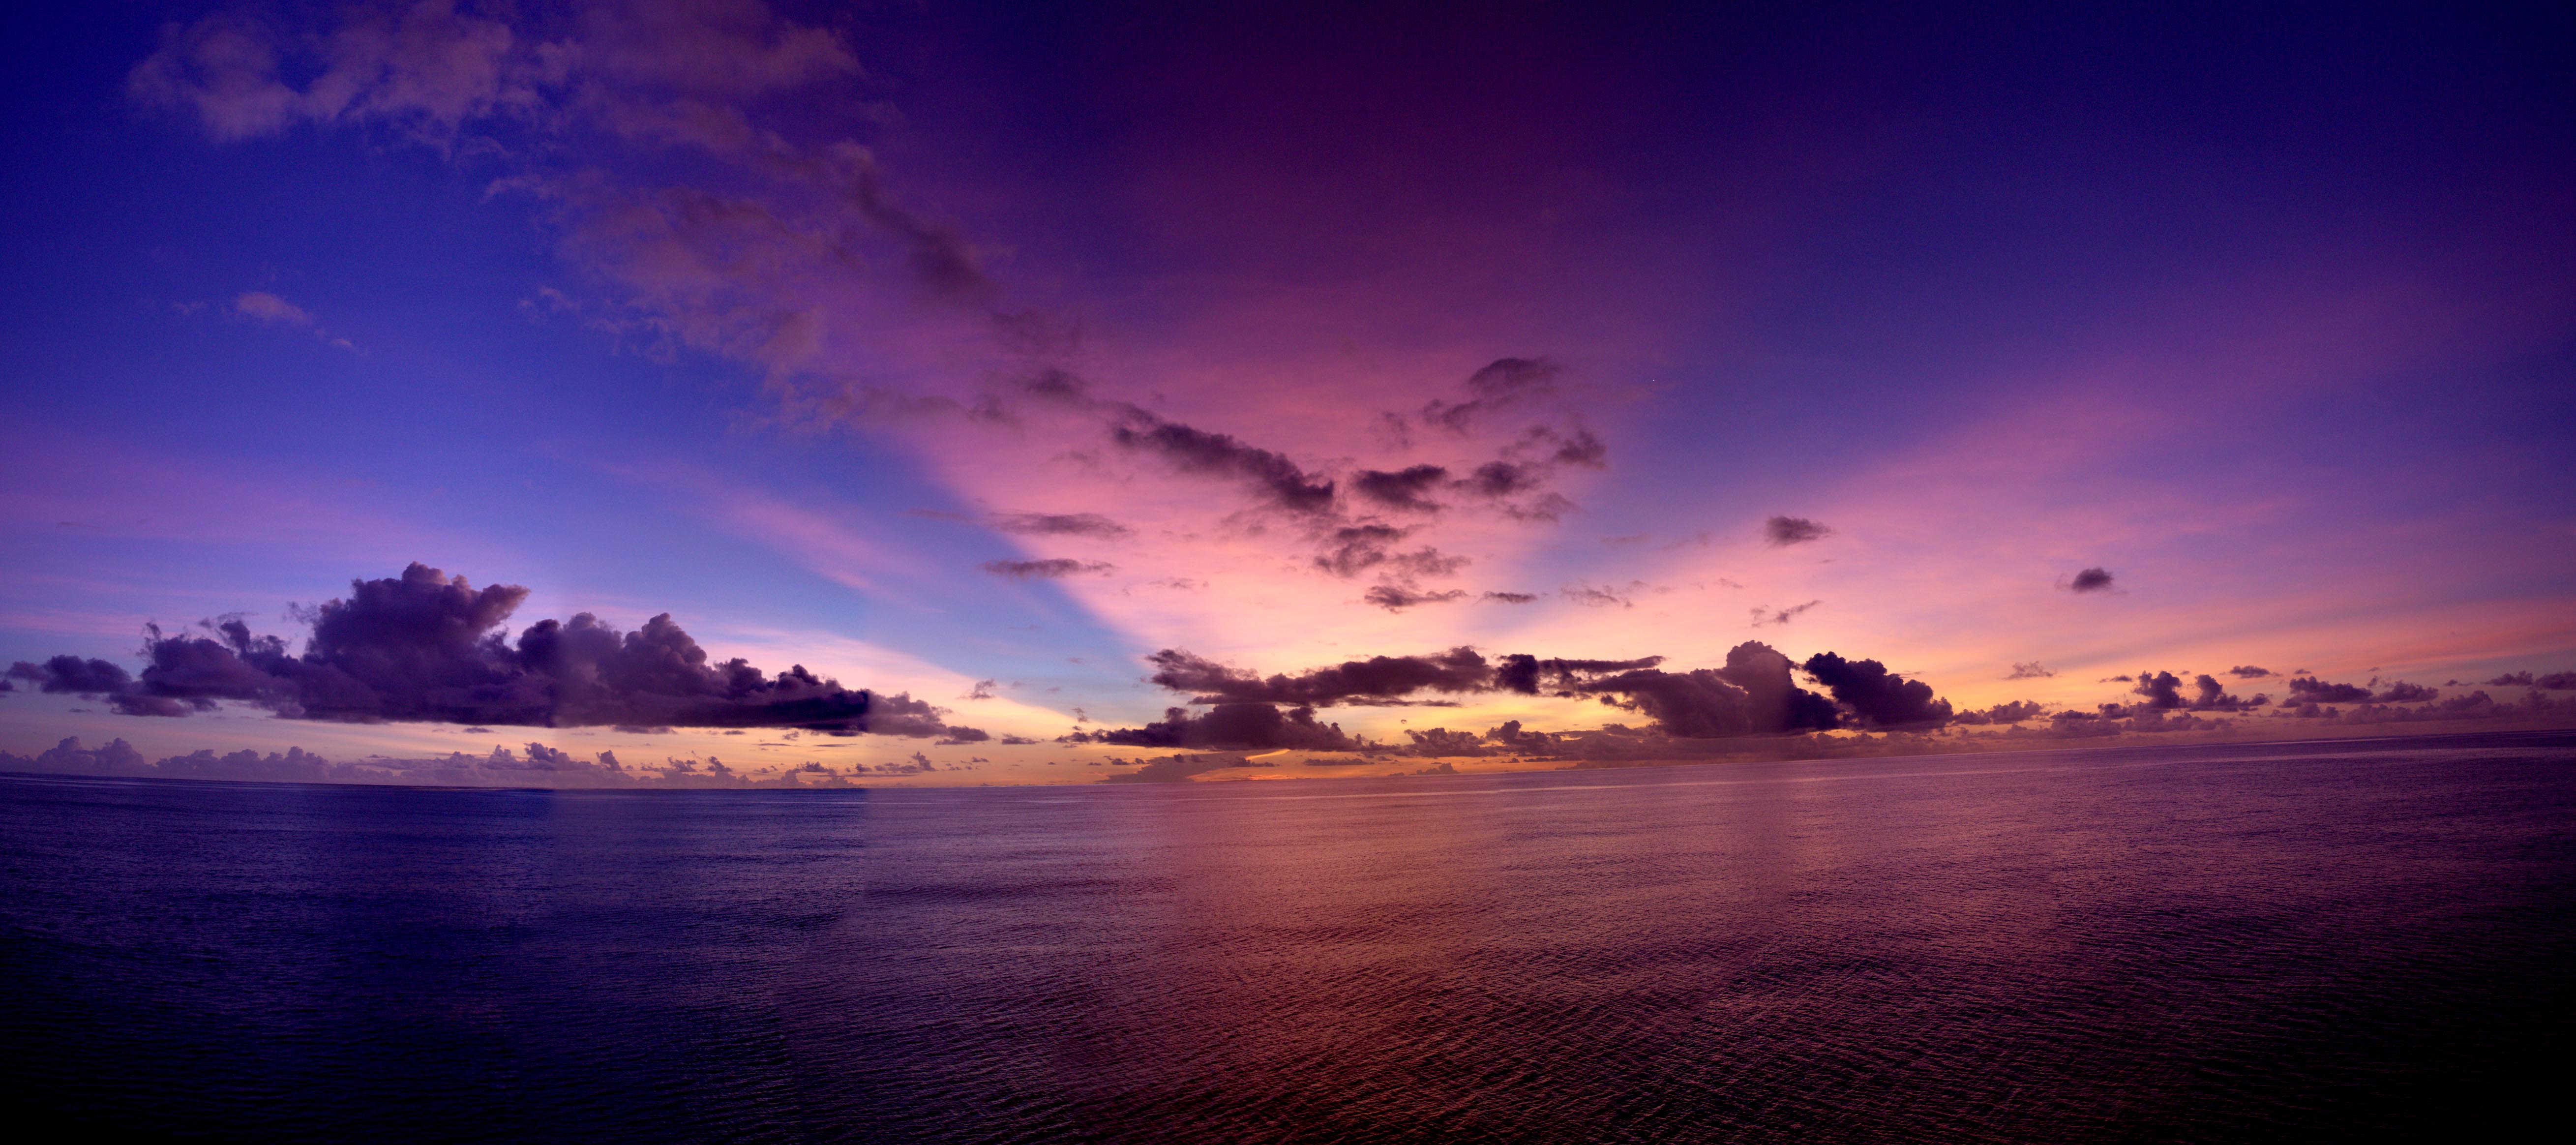 Sunset over the Pacific Ocean (image Richard Arculus)